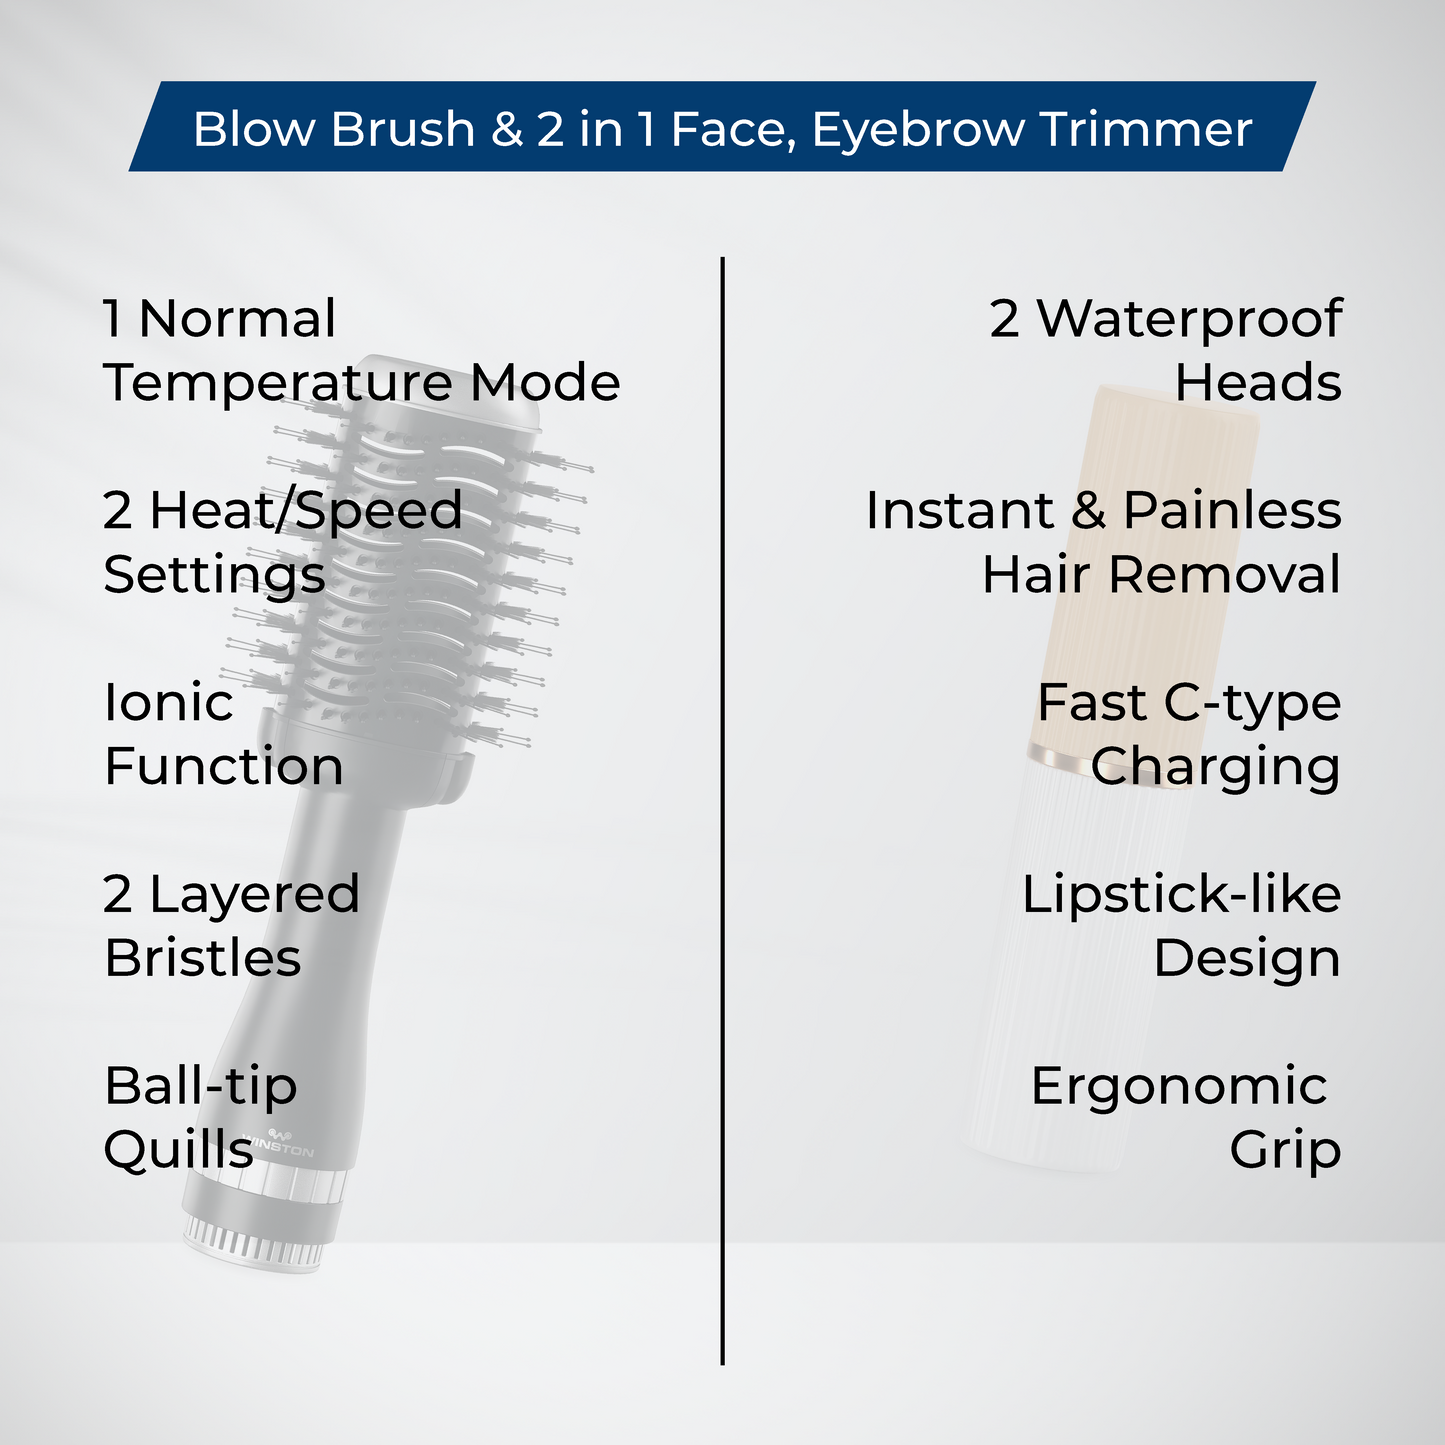 Blow Brush & 2 in 1 Face, Eyebrow Trimmer Combo